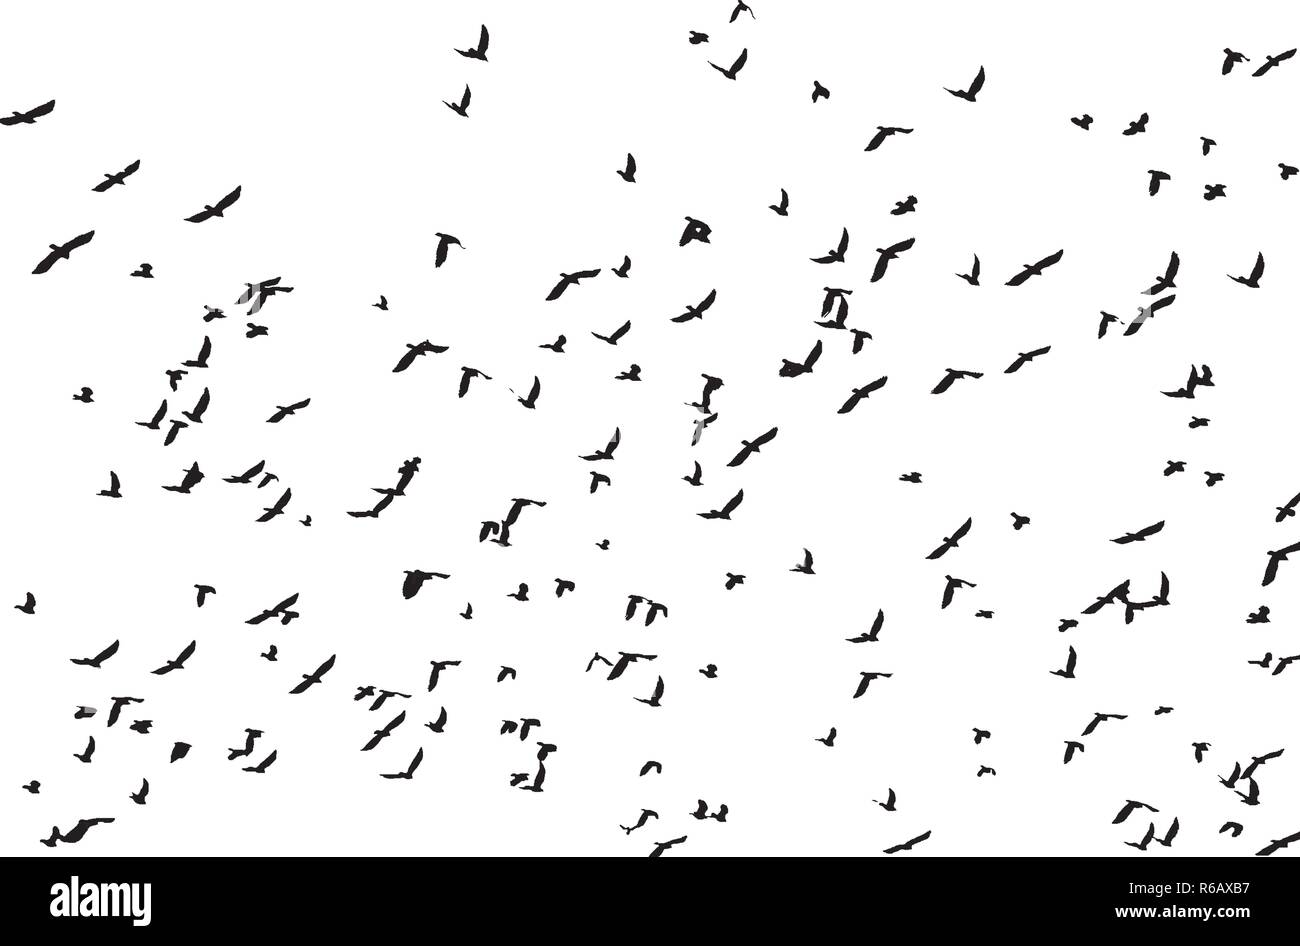 Vector illustration pattern of many black bird silhouettes flying in ...